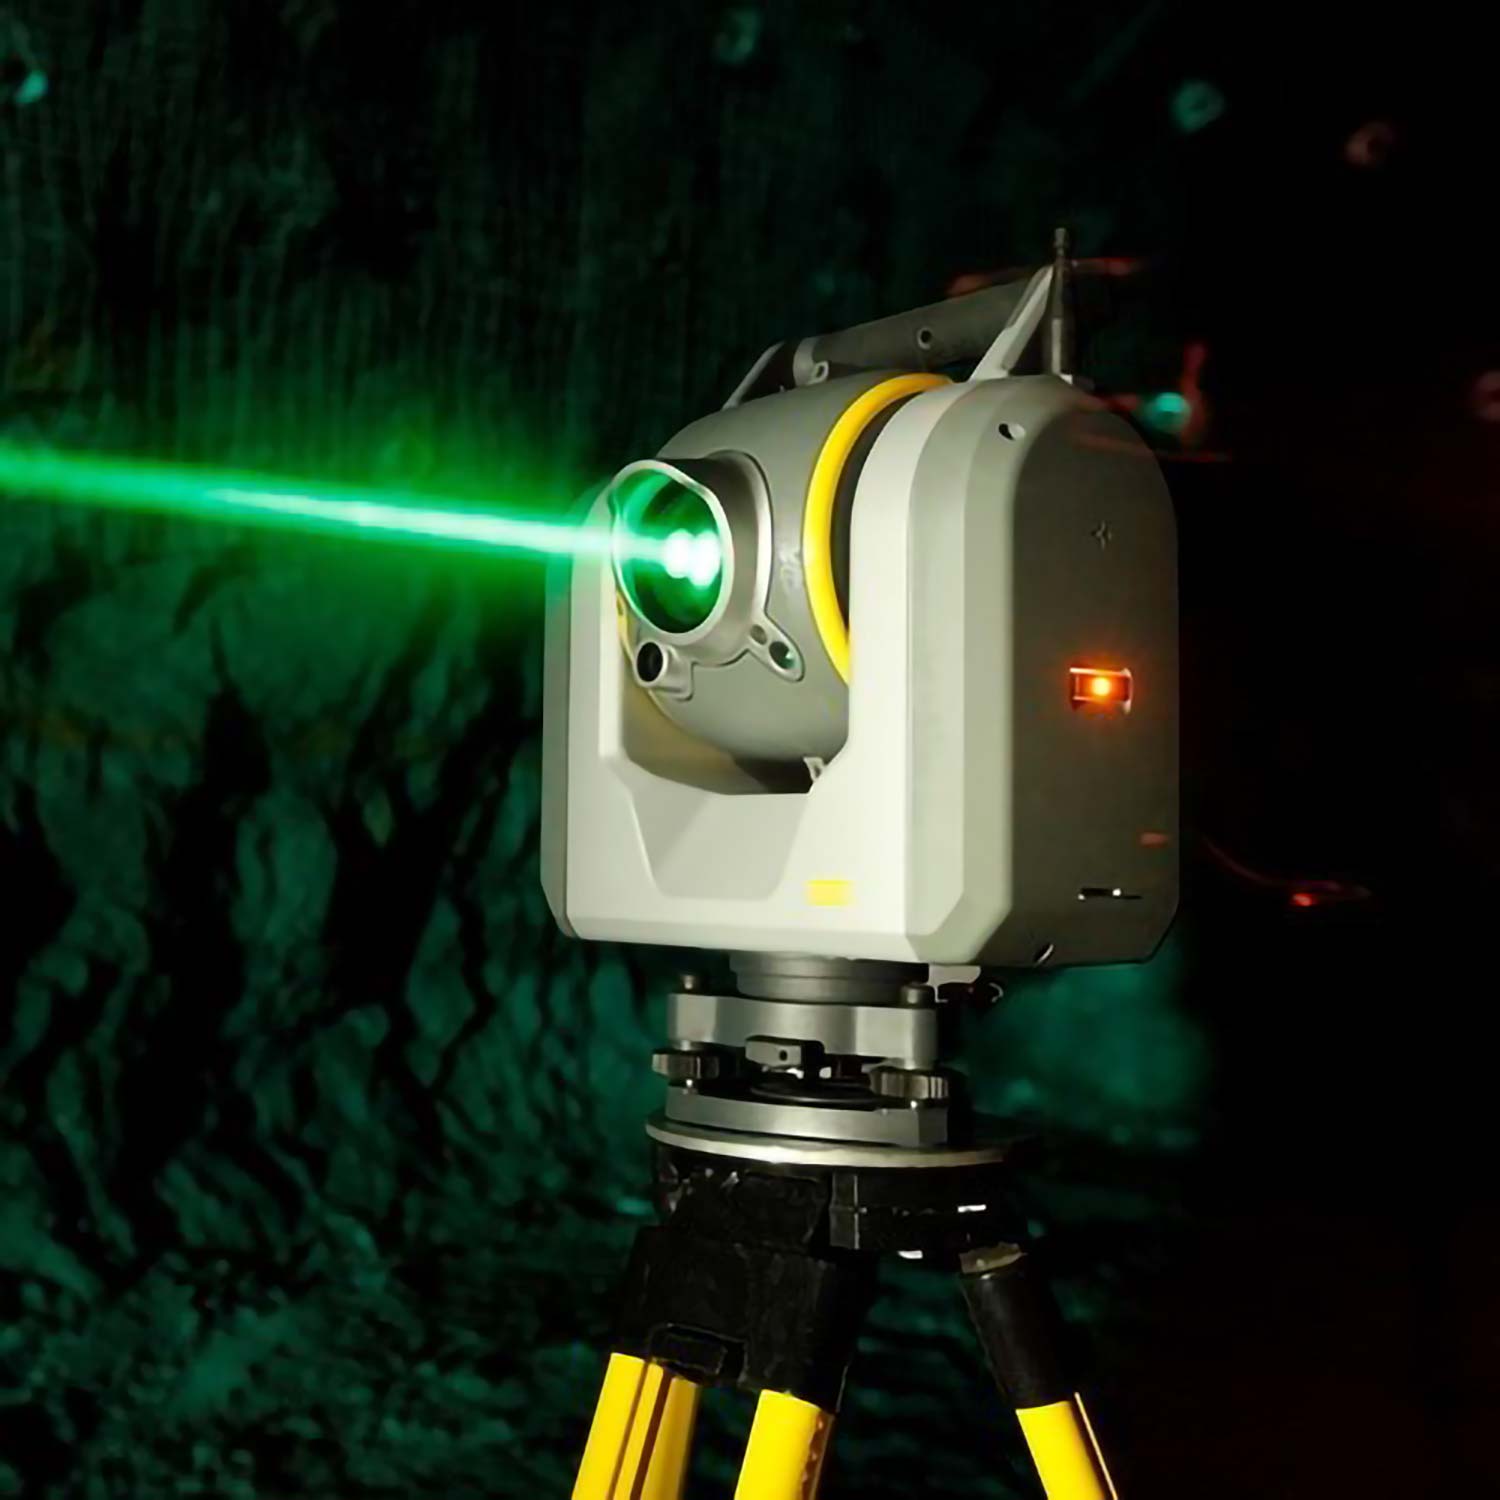 Trimble sx10 scanning total station use lasers to measure distance with very high precision